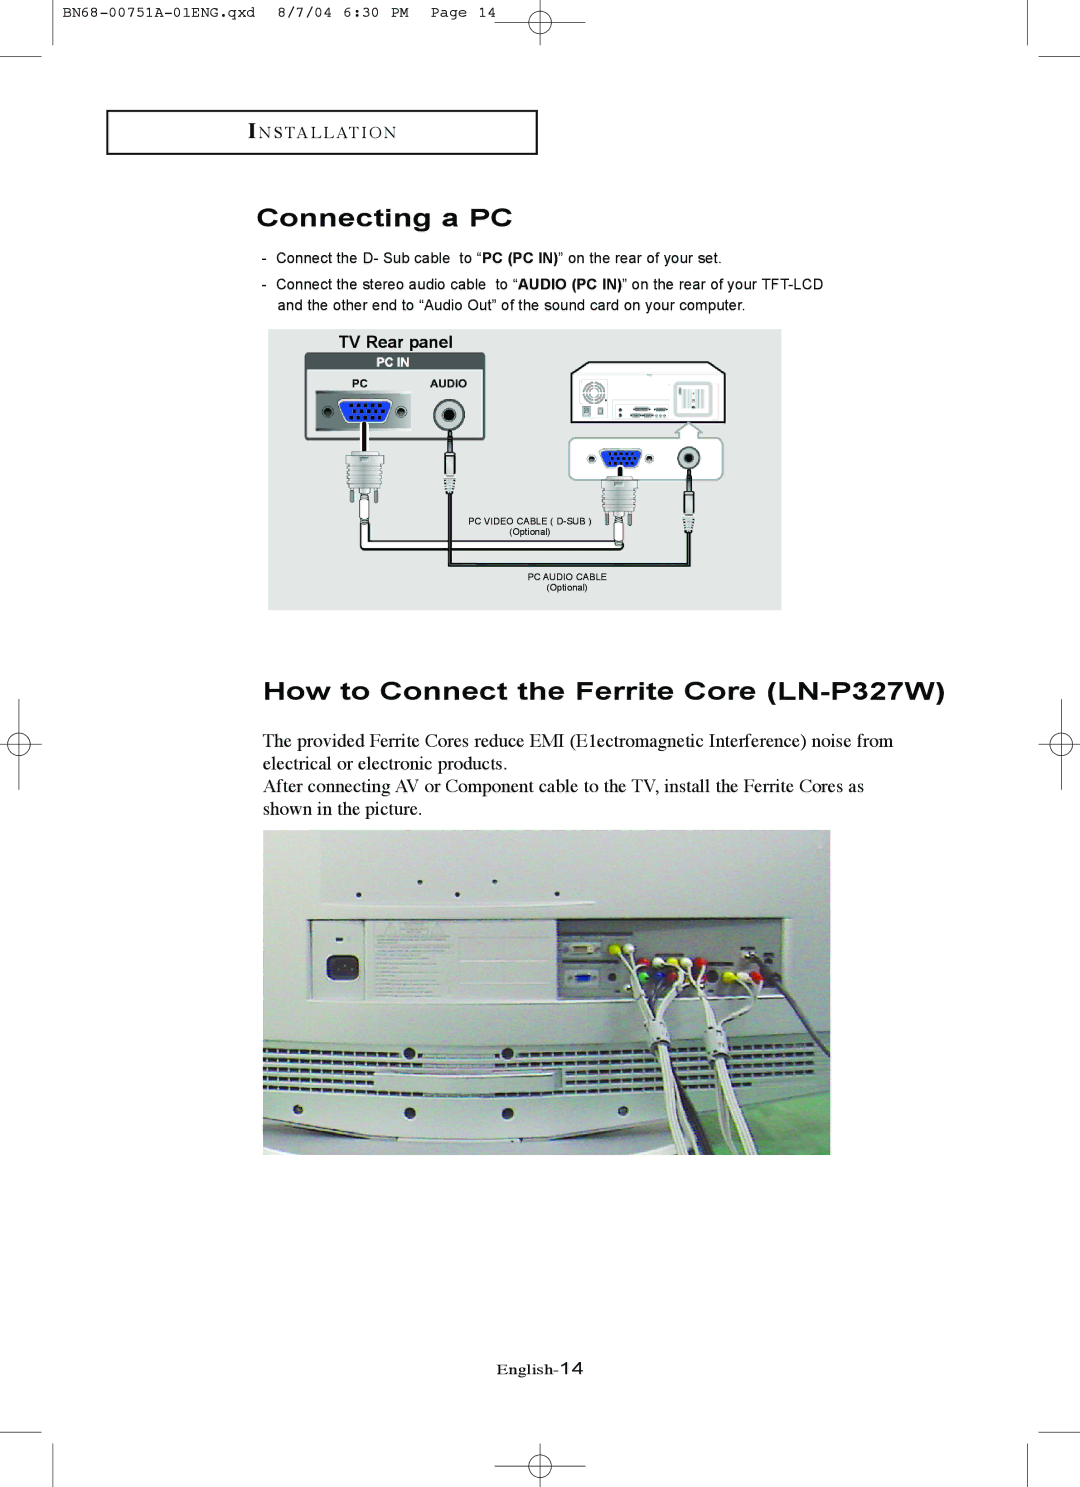 Samsung LN-P267W manual Connecting a PC, How to Connect the Ferrite Core LN-P327W, TV Rear panel 